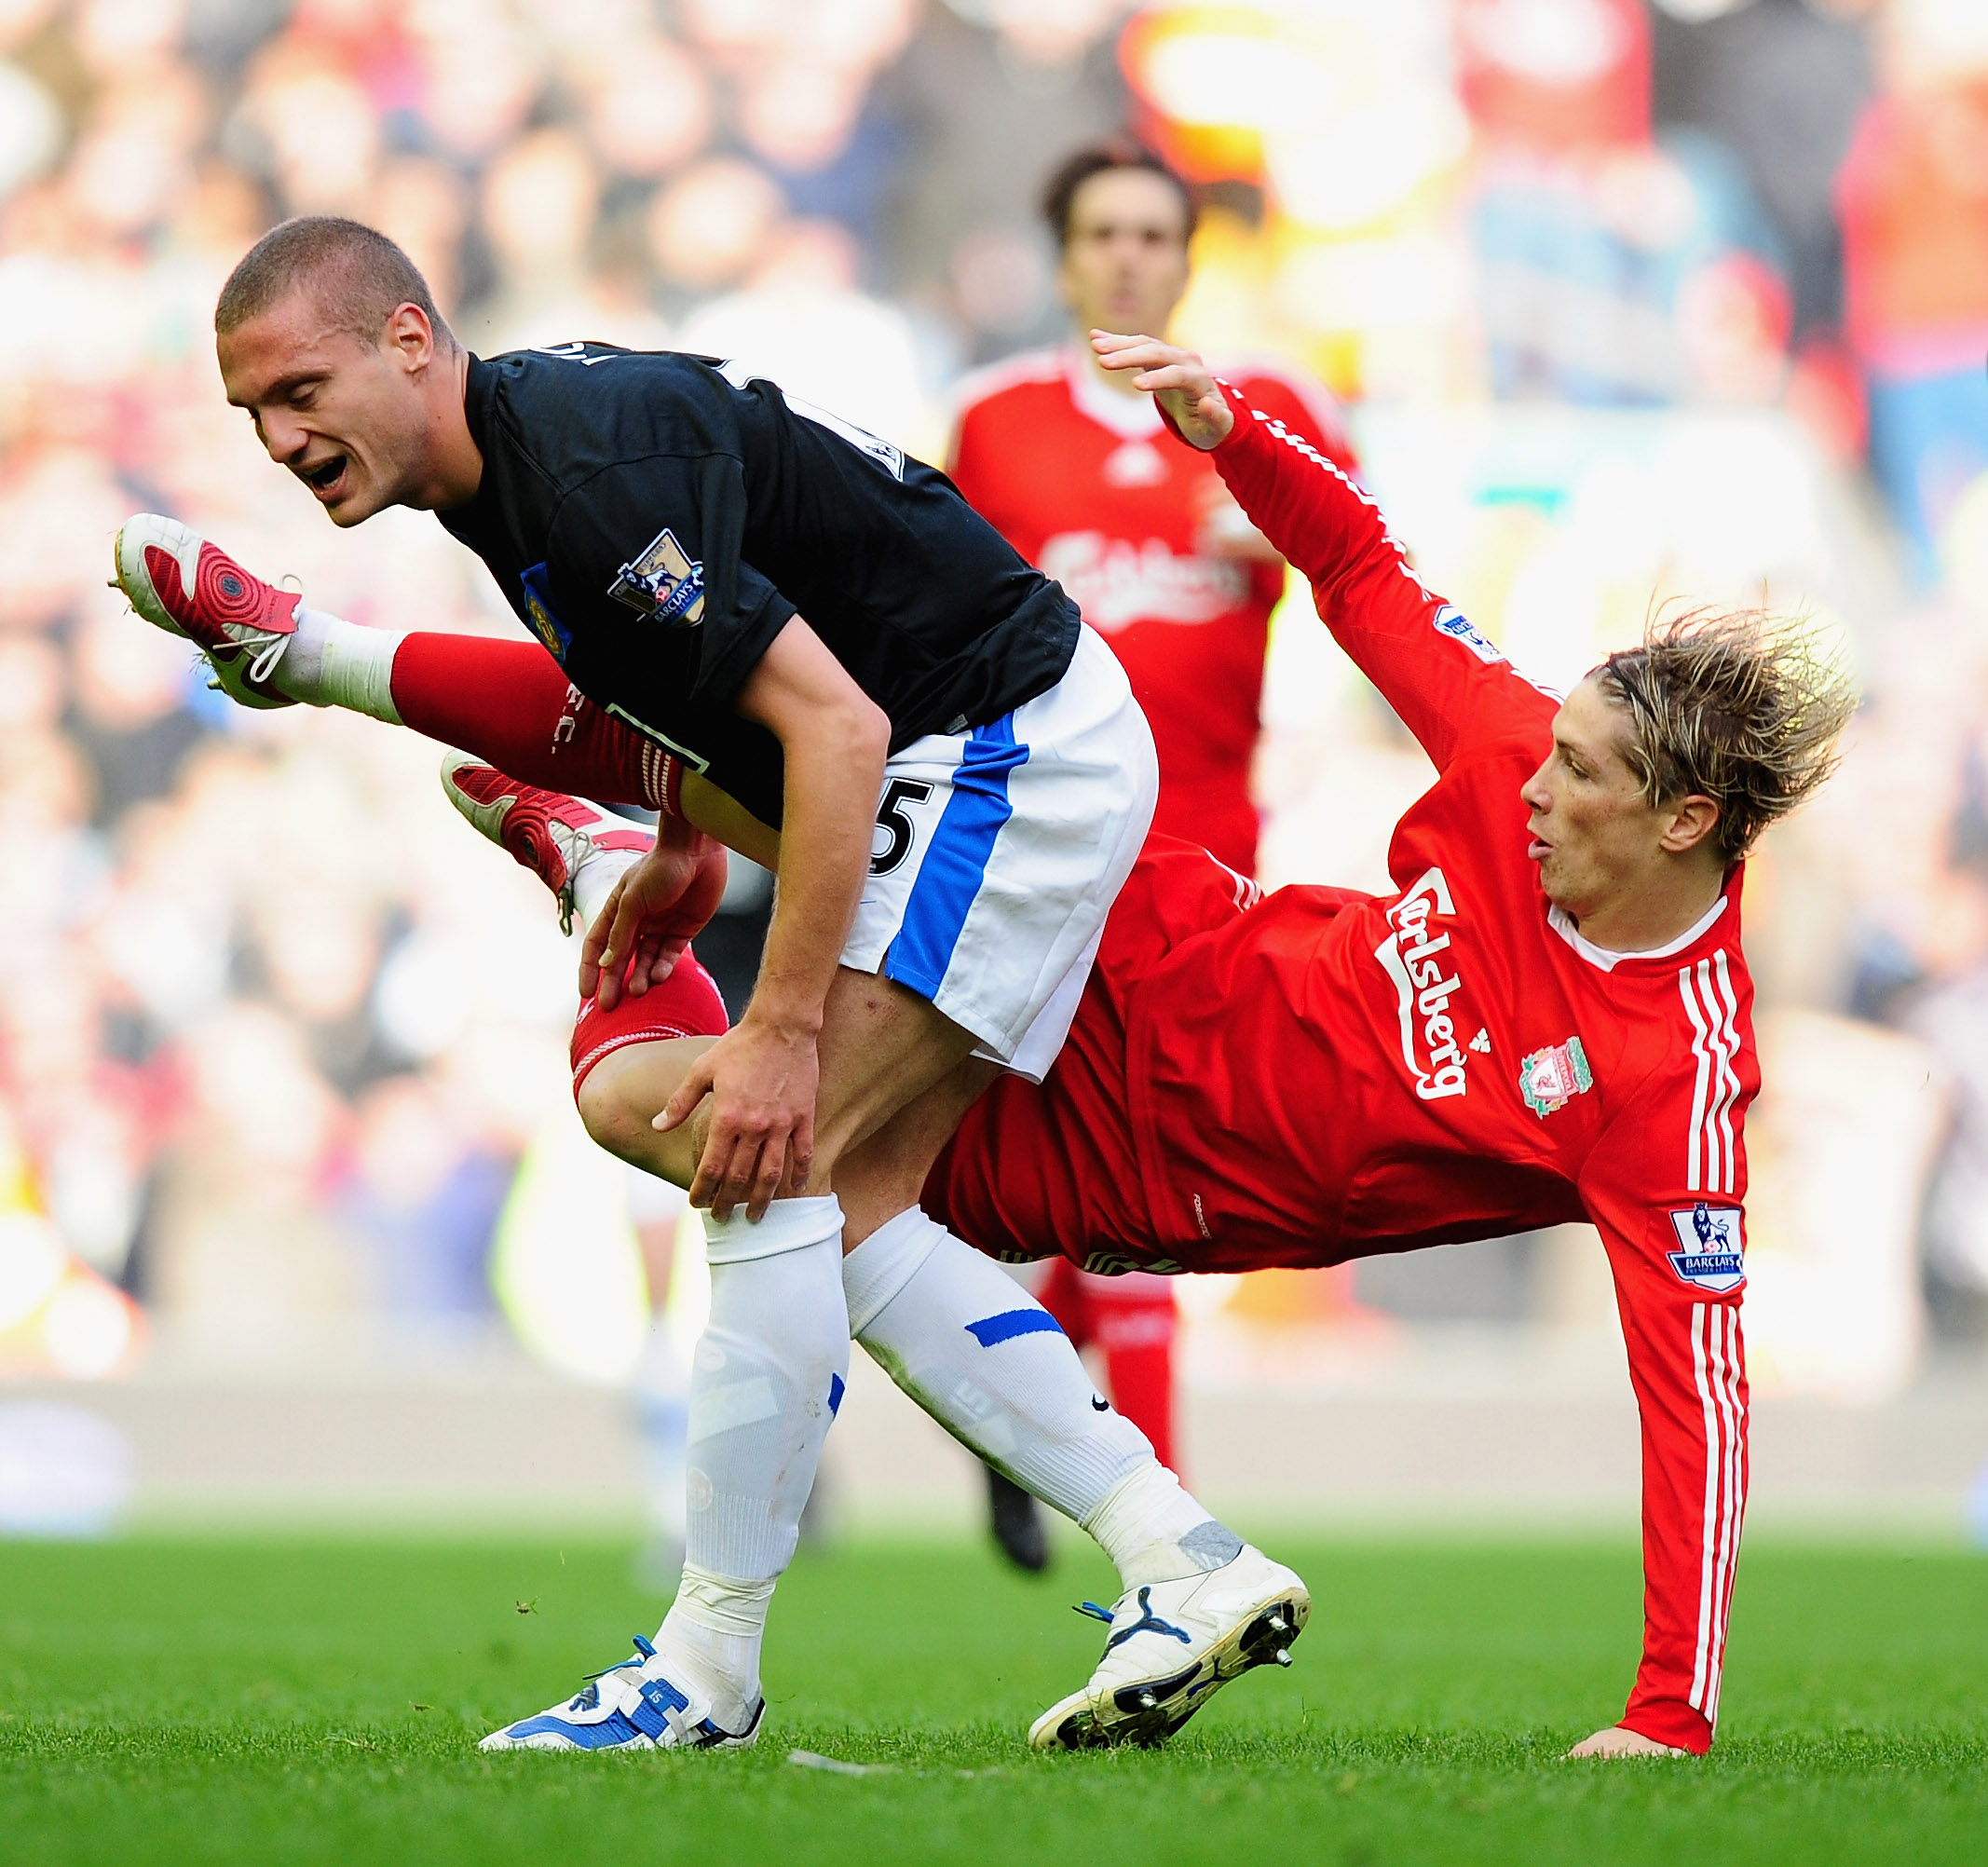 Vidic versus Torres has become one of the most intruging battles of recent games